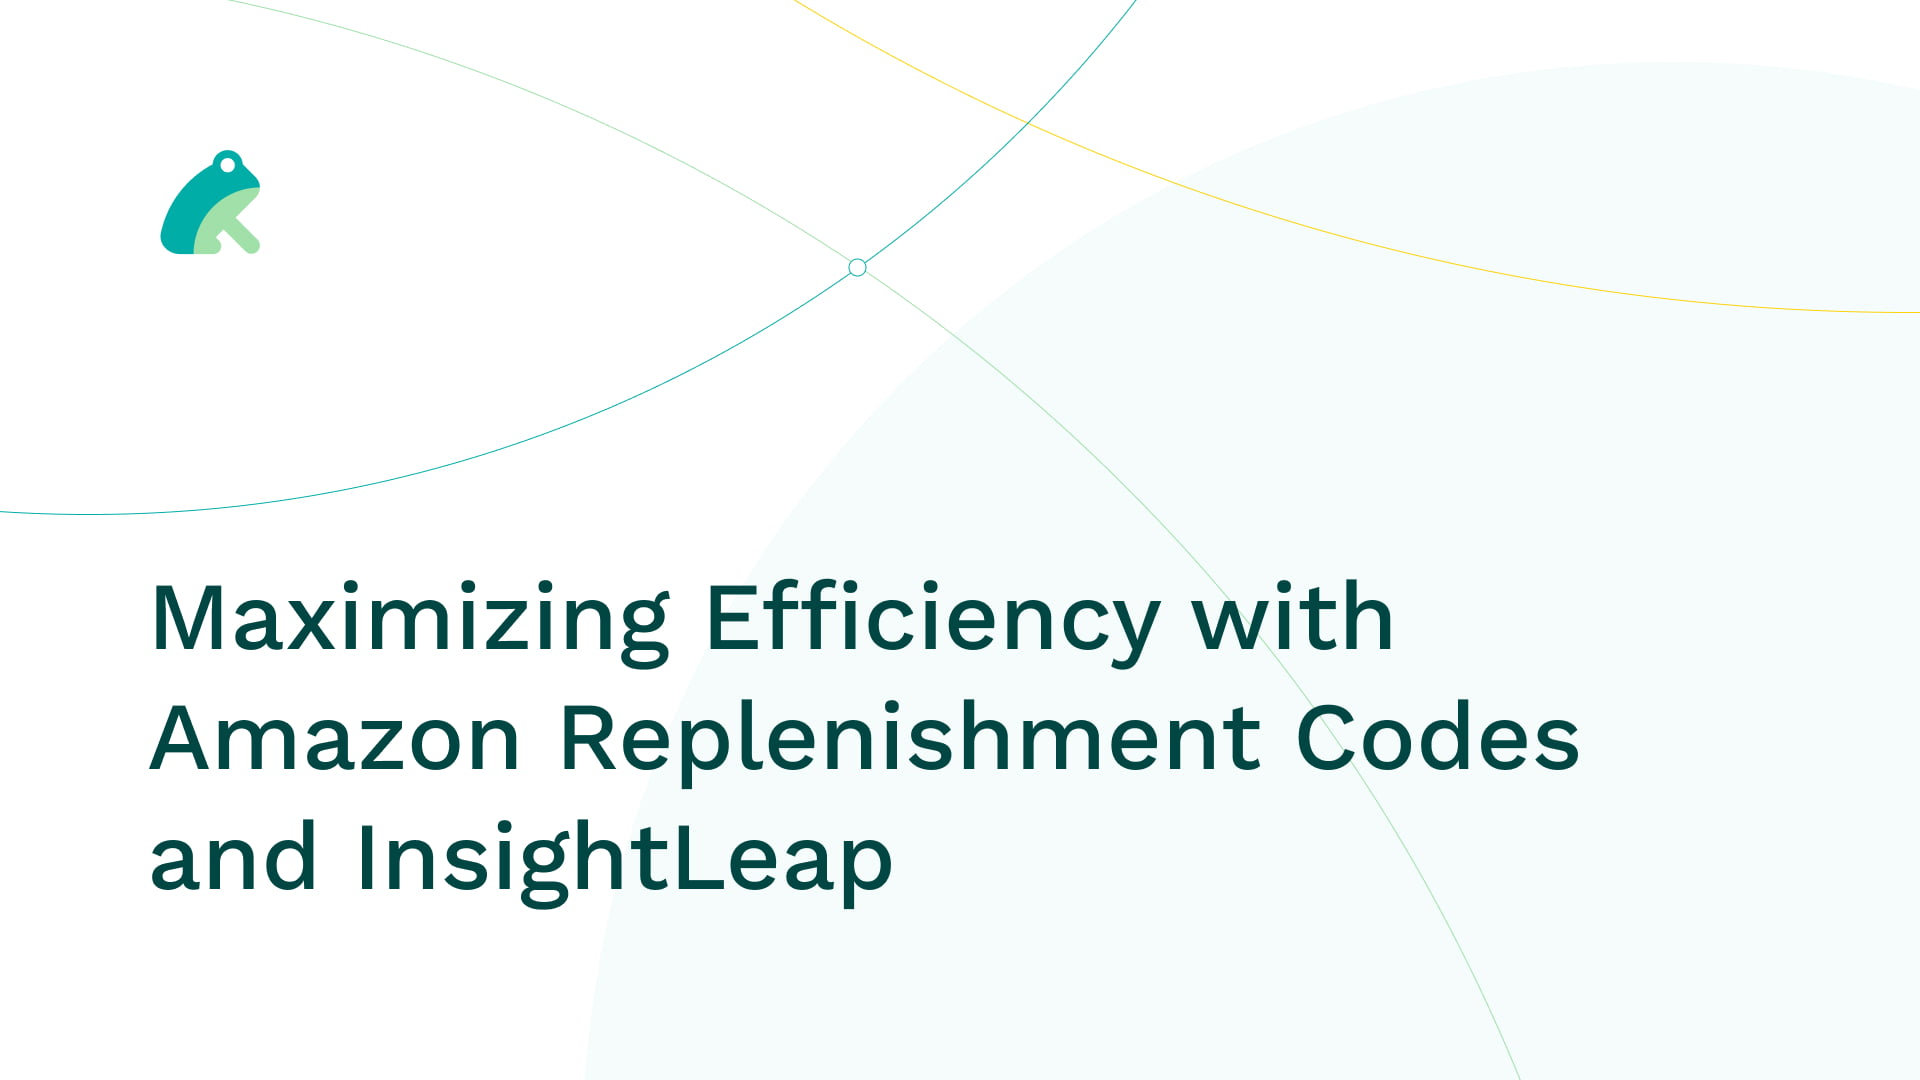 Maximizing Efficiency with Amazon Replenishment Codes and InsightLeap